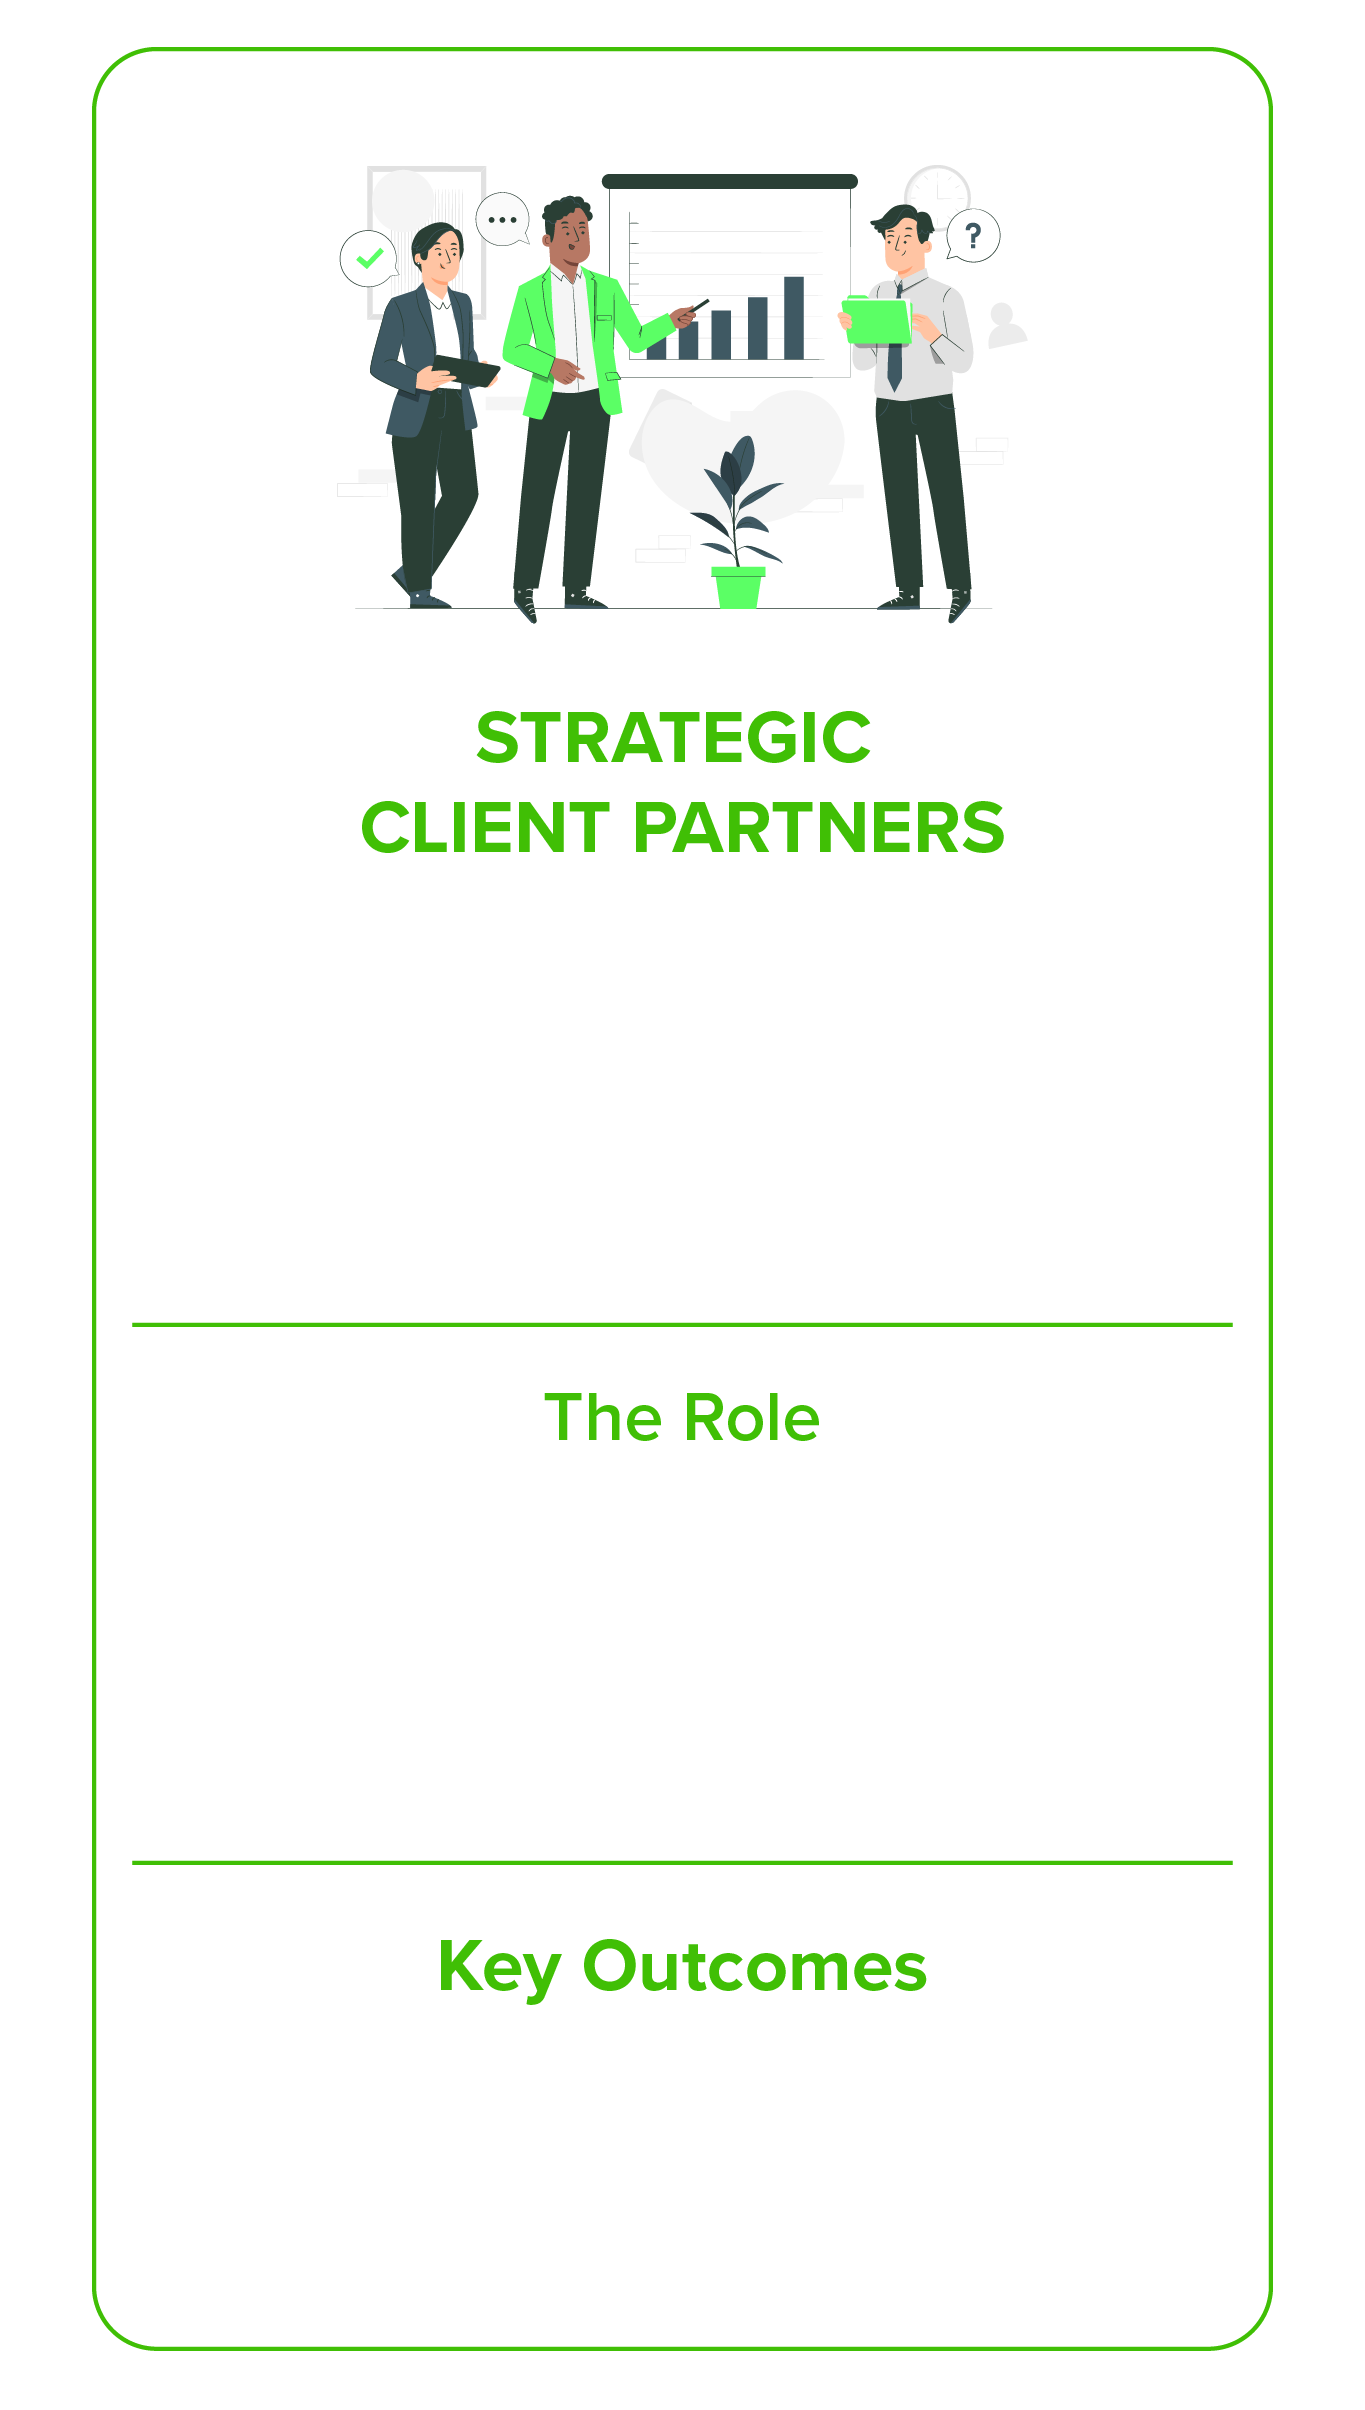 Our Partnership Roles